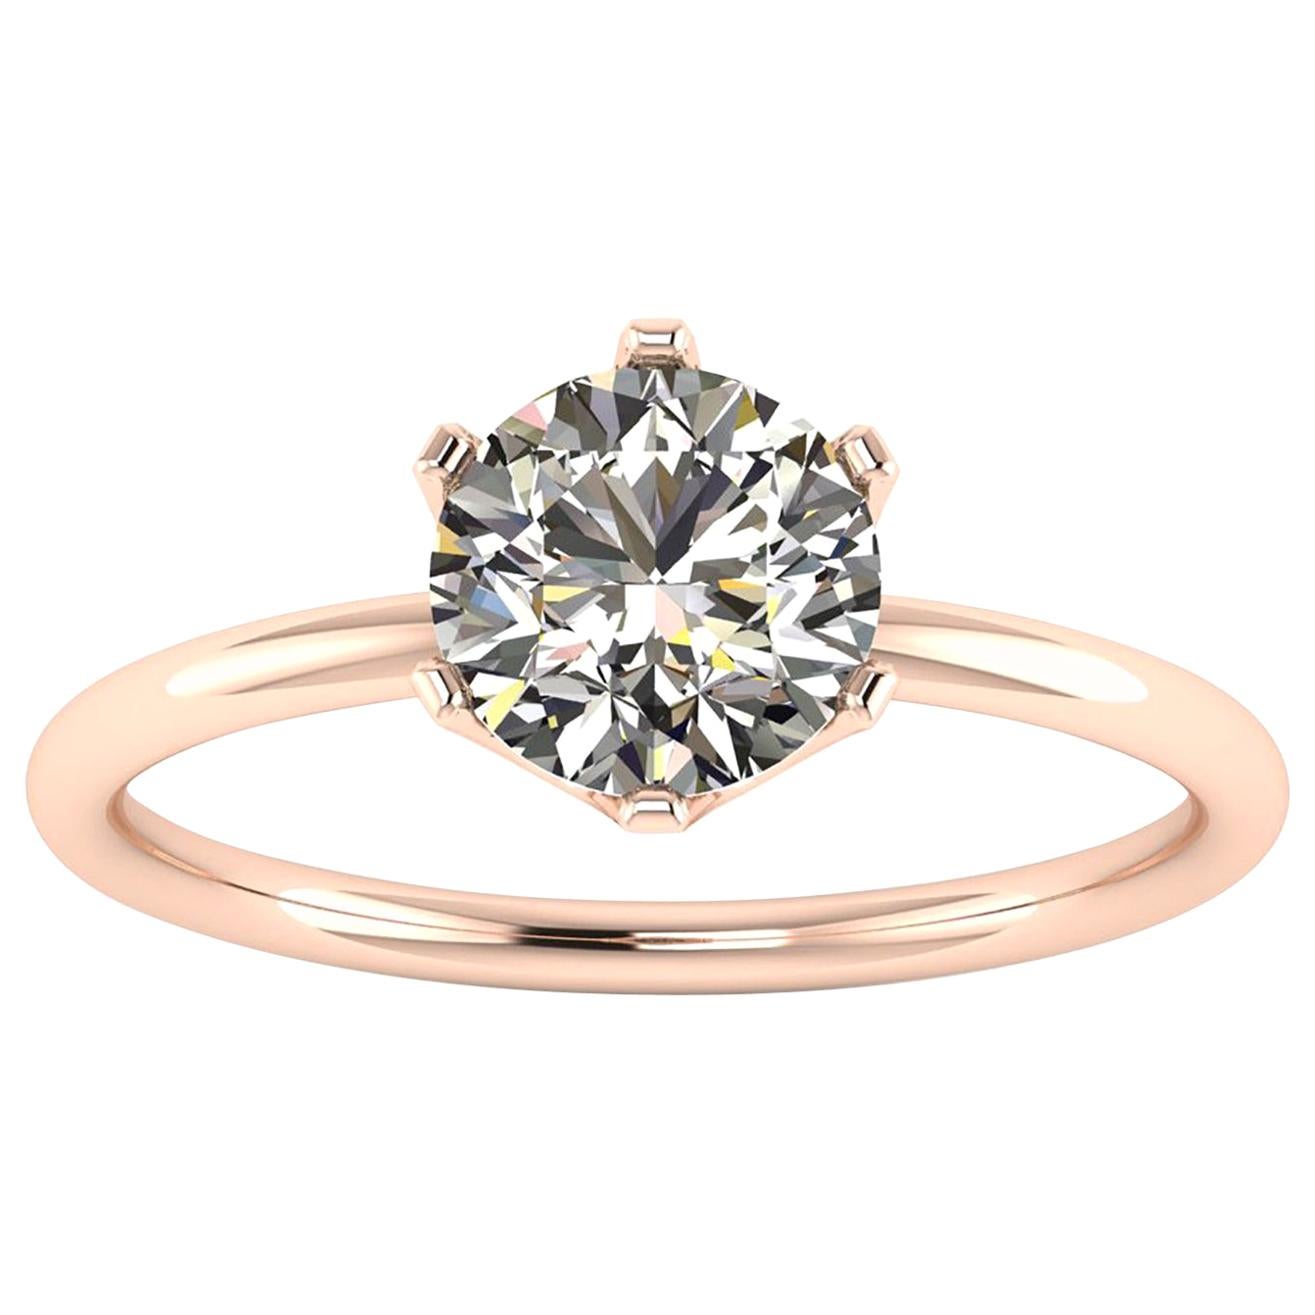 GIA Certified 1.01 Carat White Diamond in 18 Rose Gold Solitaire Engagement Ring For Sale